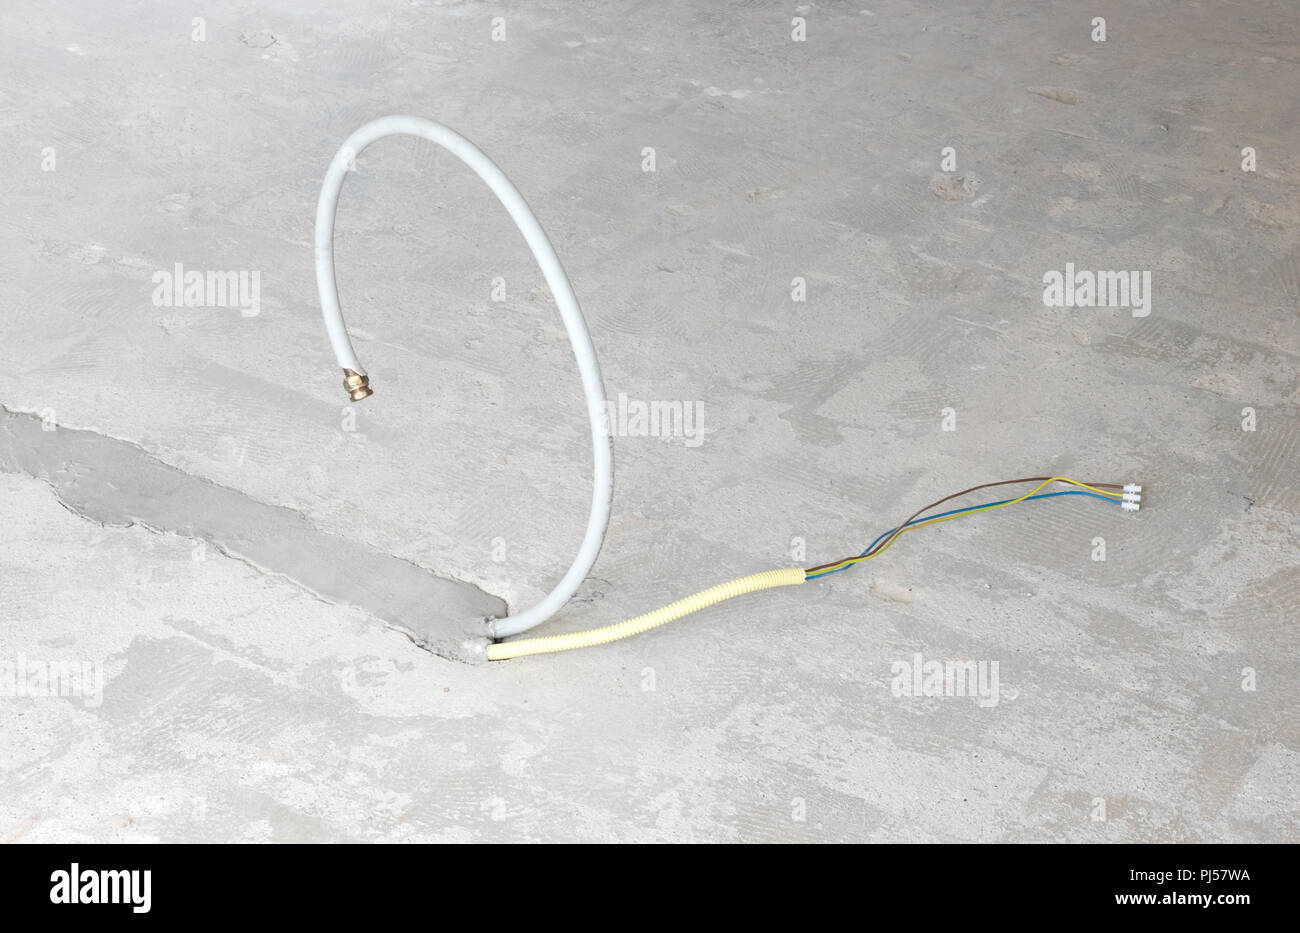 New electricity and gas pipe in a concrete floor - Building a kitchen island Stock Photo